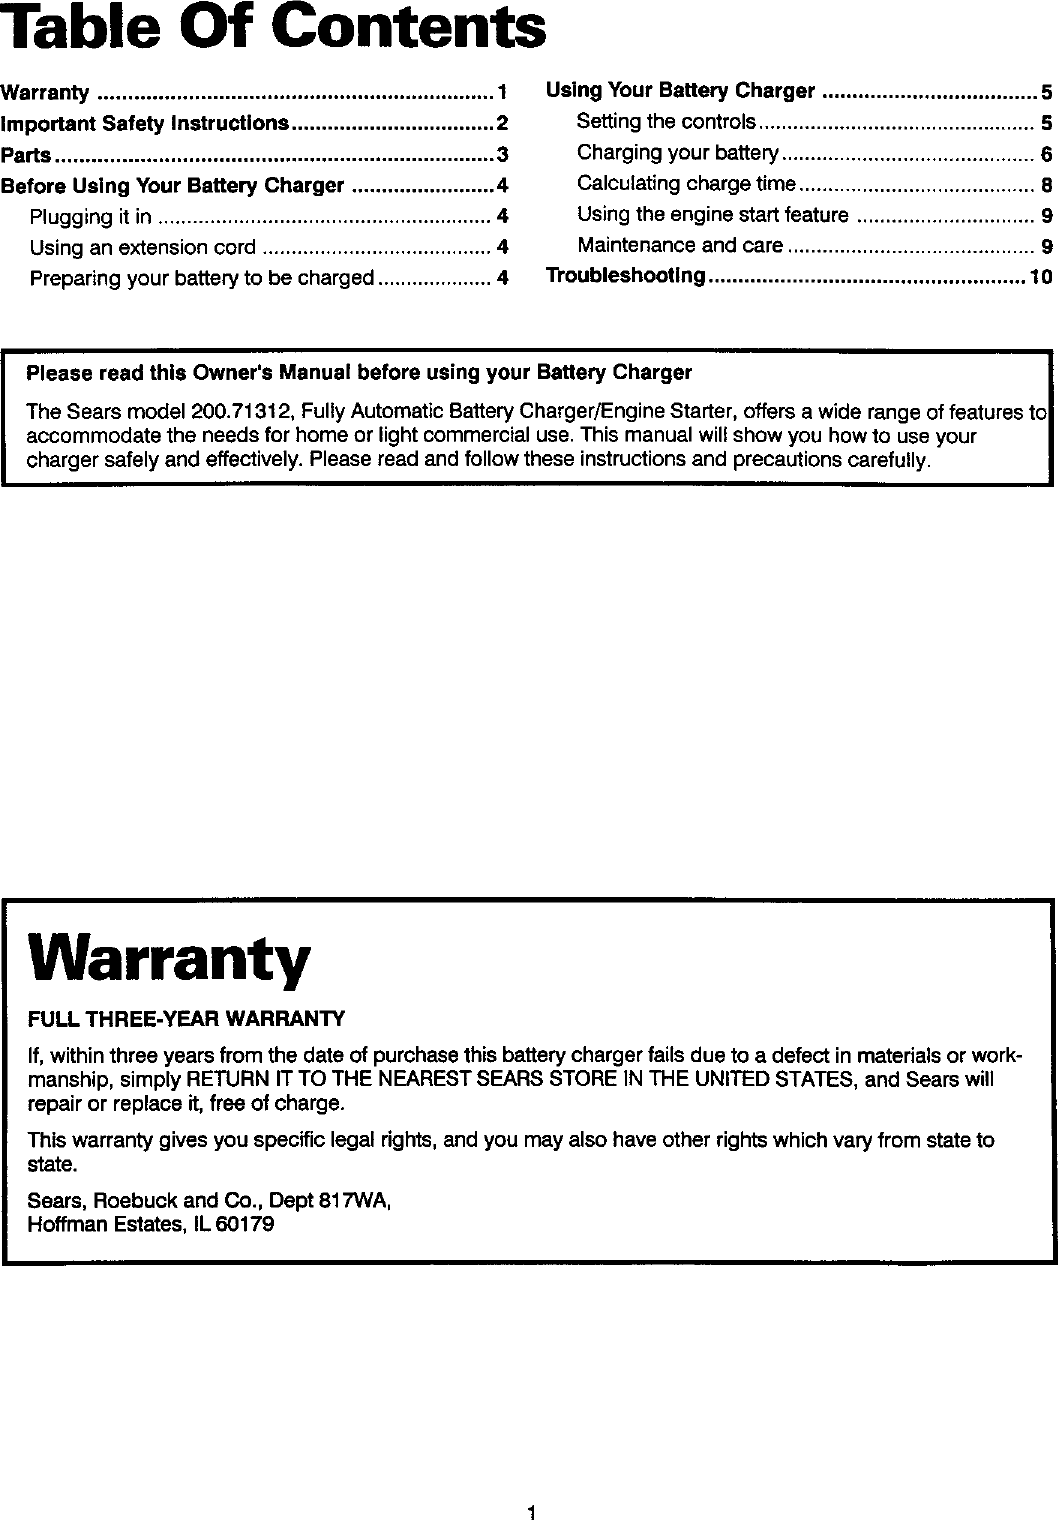 Page 2 of 12 - Diehard 20071312 User Manual  BATTERY CHARGER - Manuals And Guides L0305326